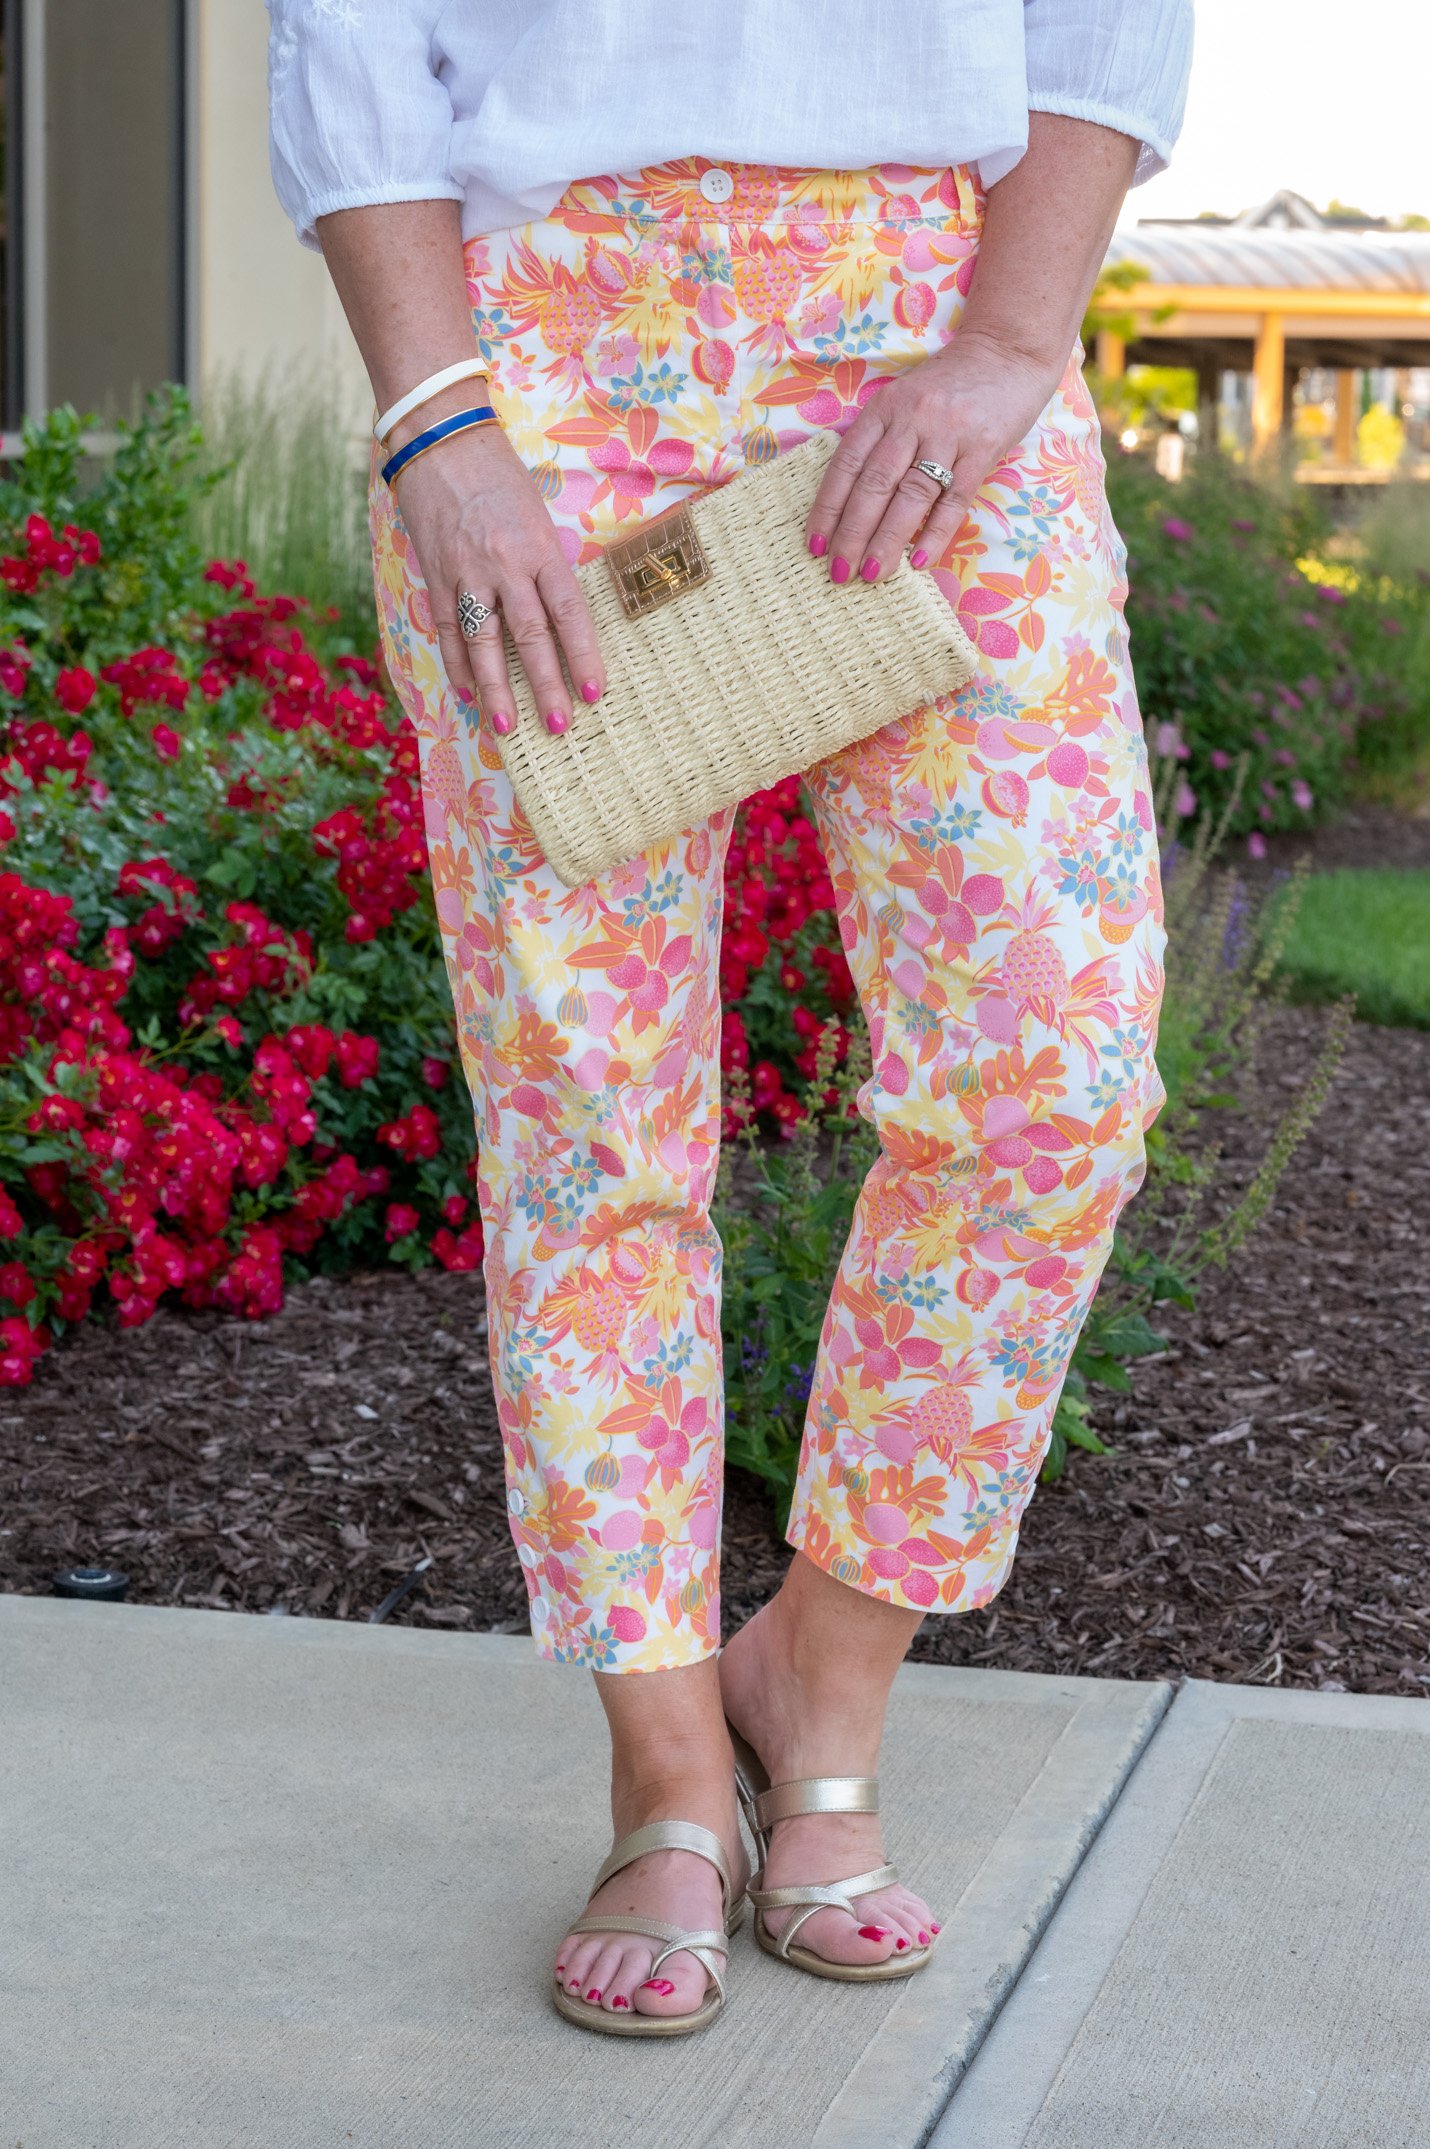 PINK FLORAL PANTS  Everyday outfits, Floral pants, Accessorizing